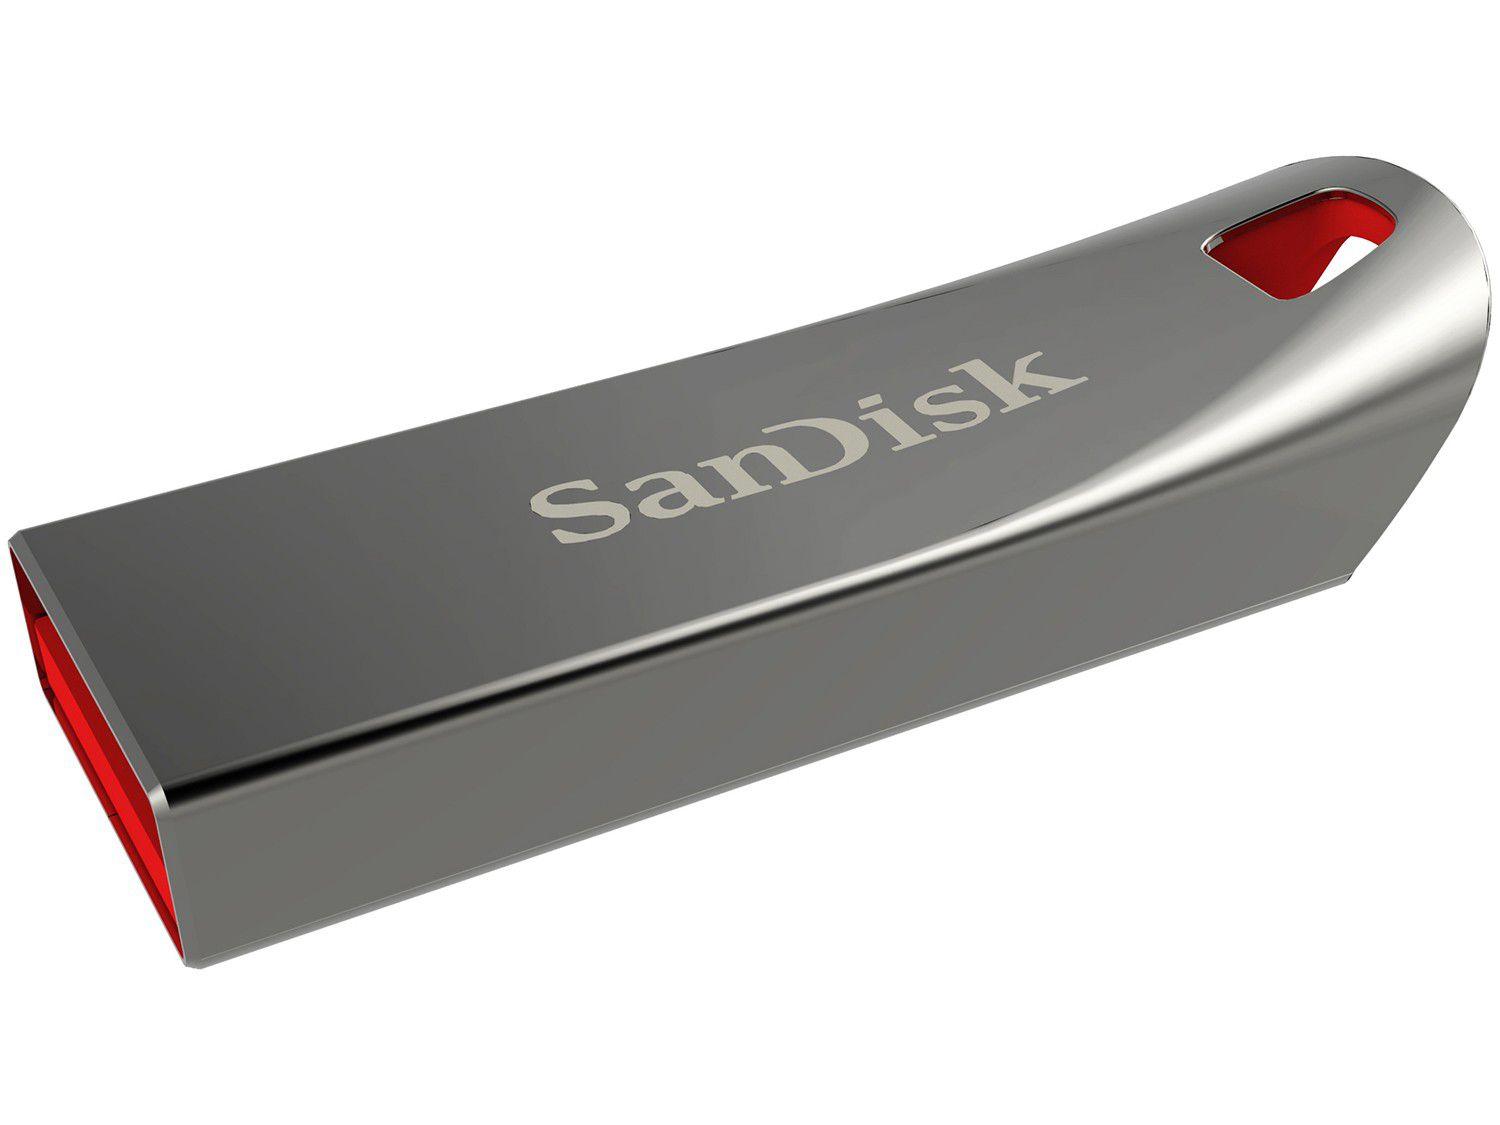 how to hack sandisk secure access vault